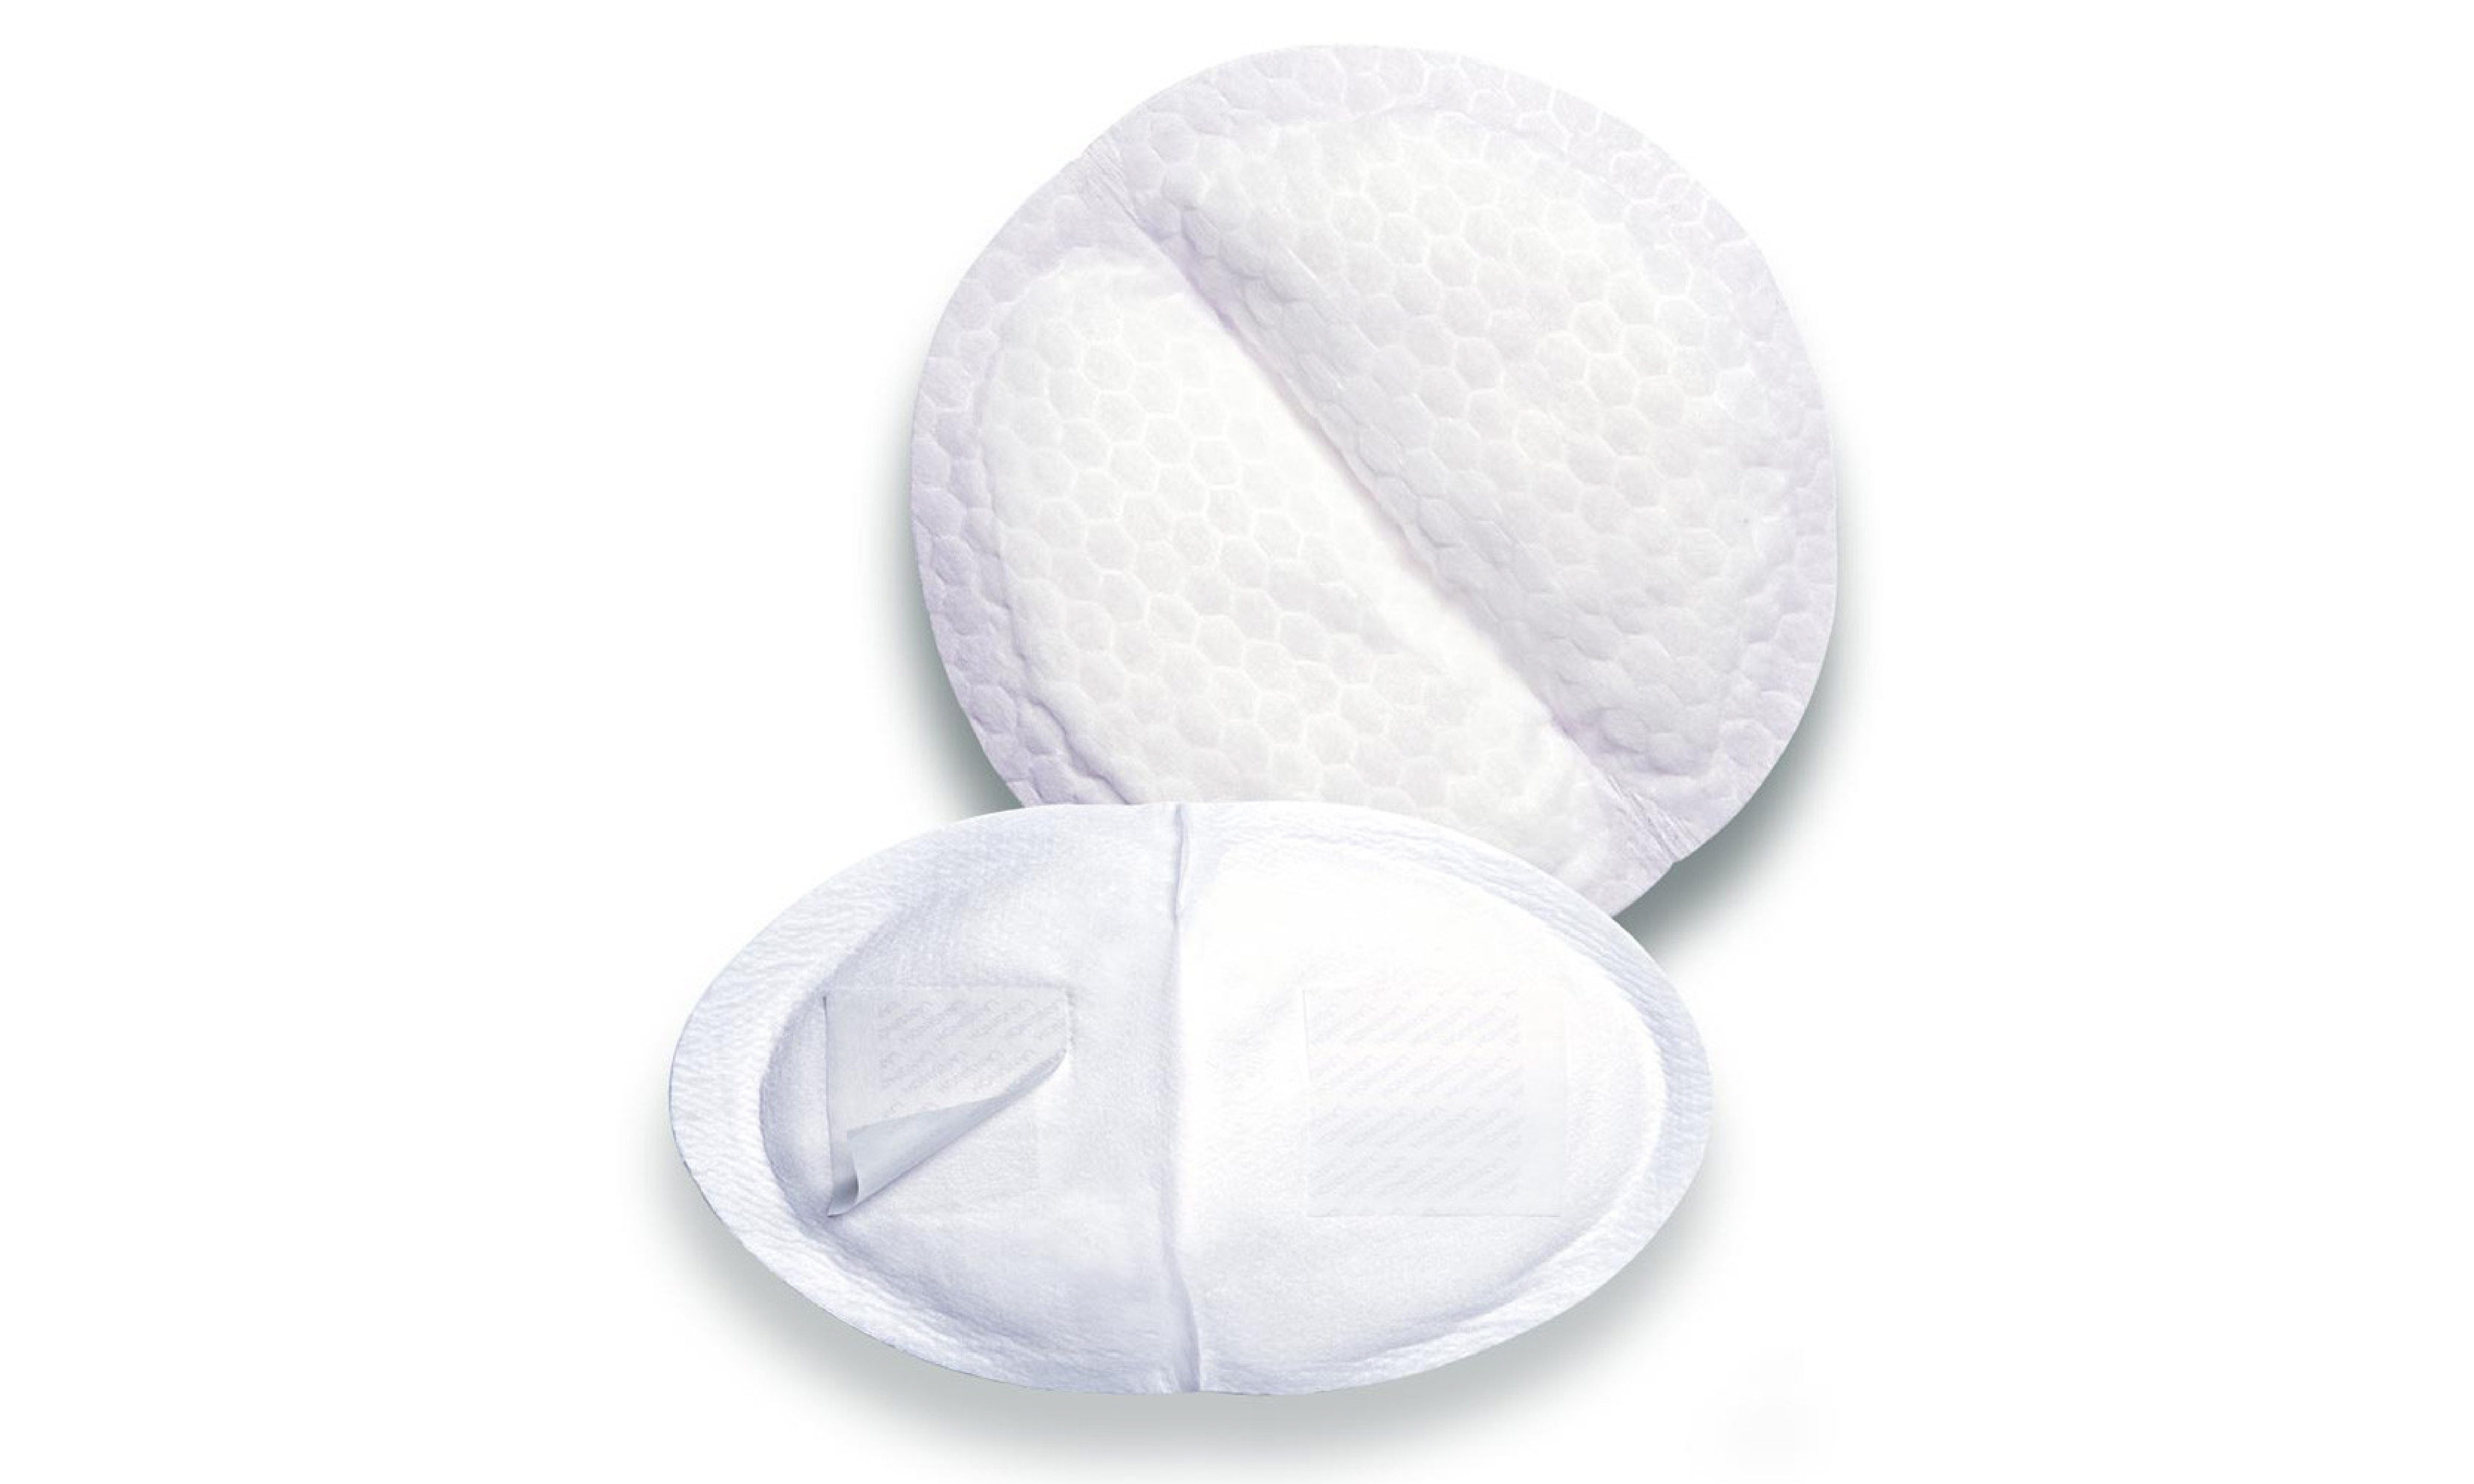 Lansinoh Stay Dry Disposable Nursing Pads, Soft and Super